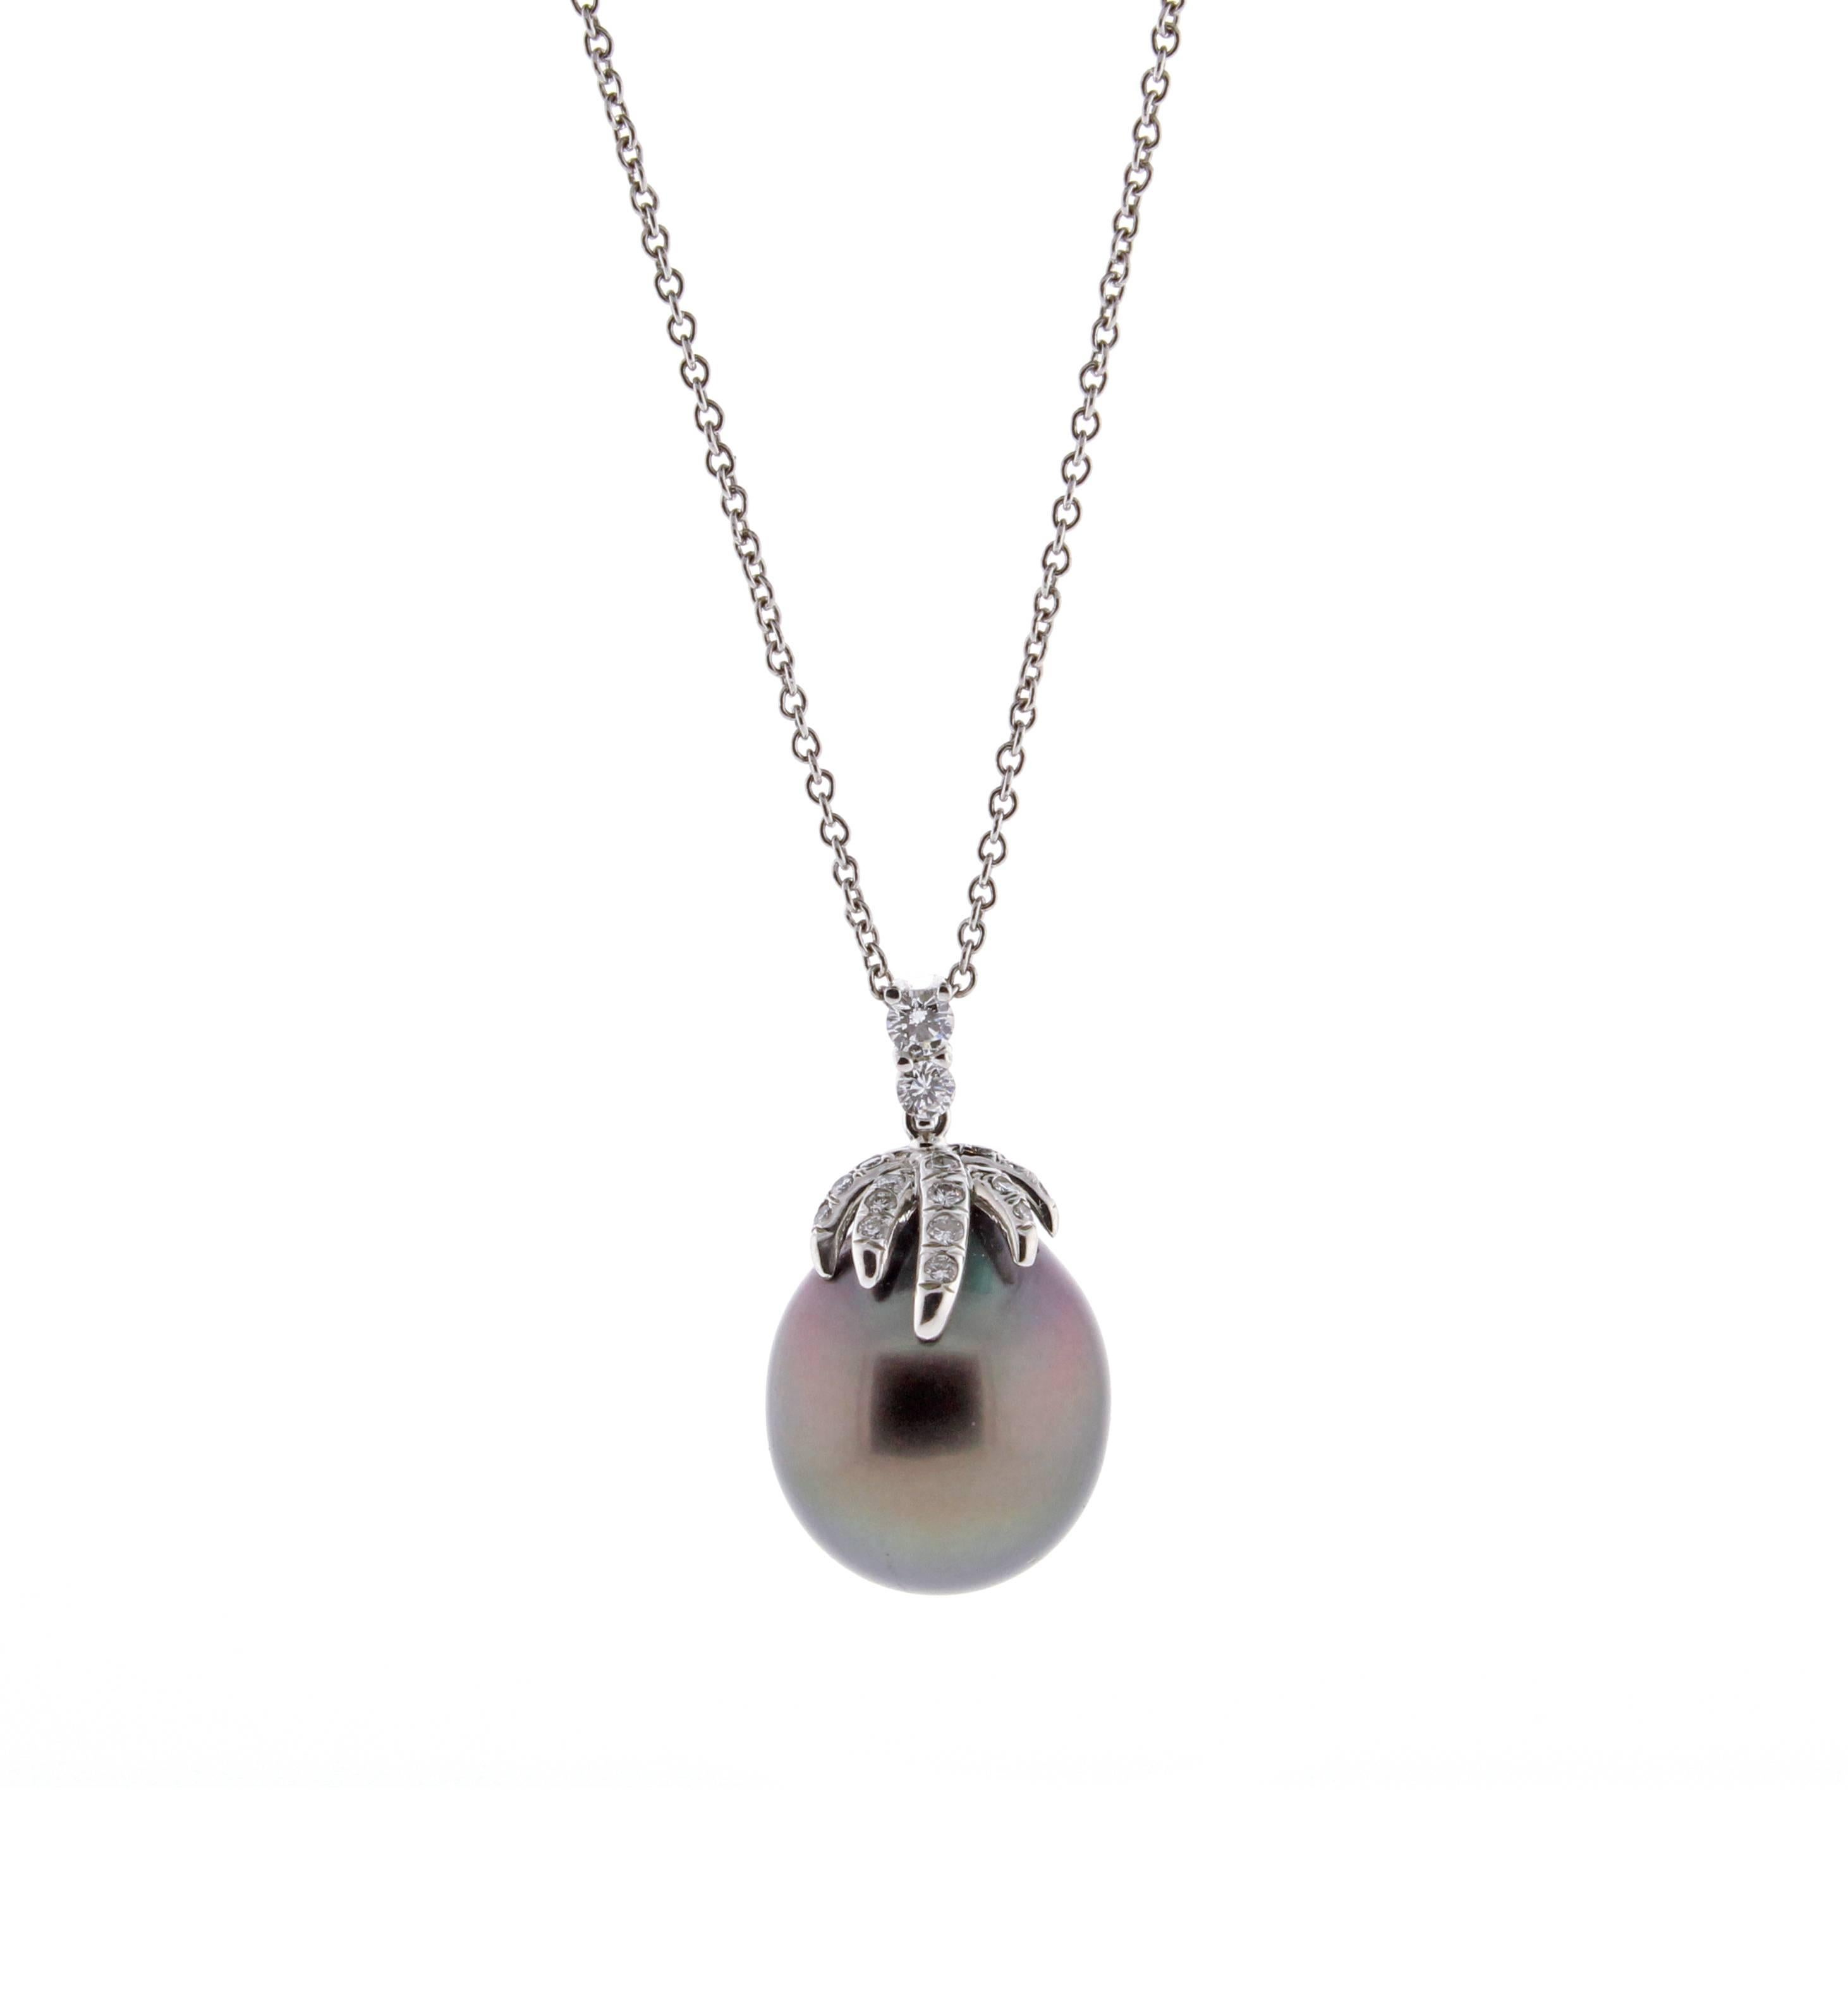 From Tiffany's fireworks collection;  this Tahitian pearl and diamond necklace. The magnificent  Tahitian south sea pearl measures 14 by 12mm with 22 brilliant cut diamonds weighing .14 carats. Set in platinum, 24 inch Tiffany & Co  platinum